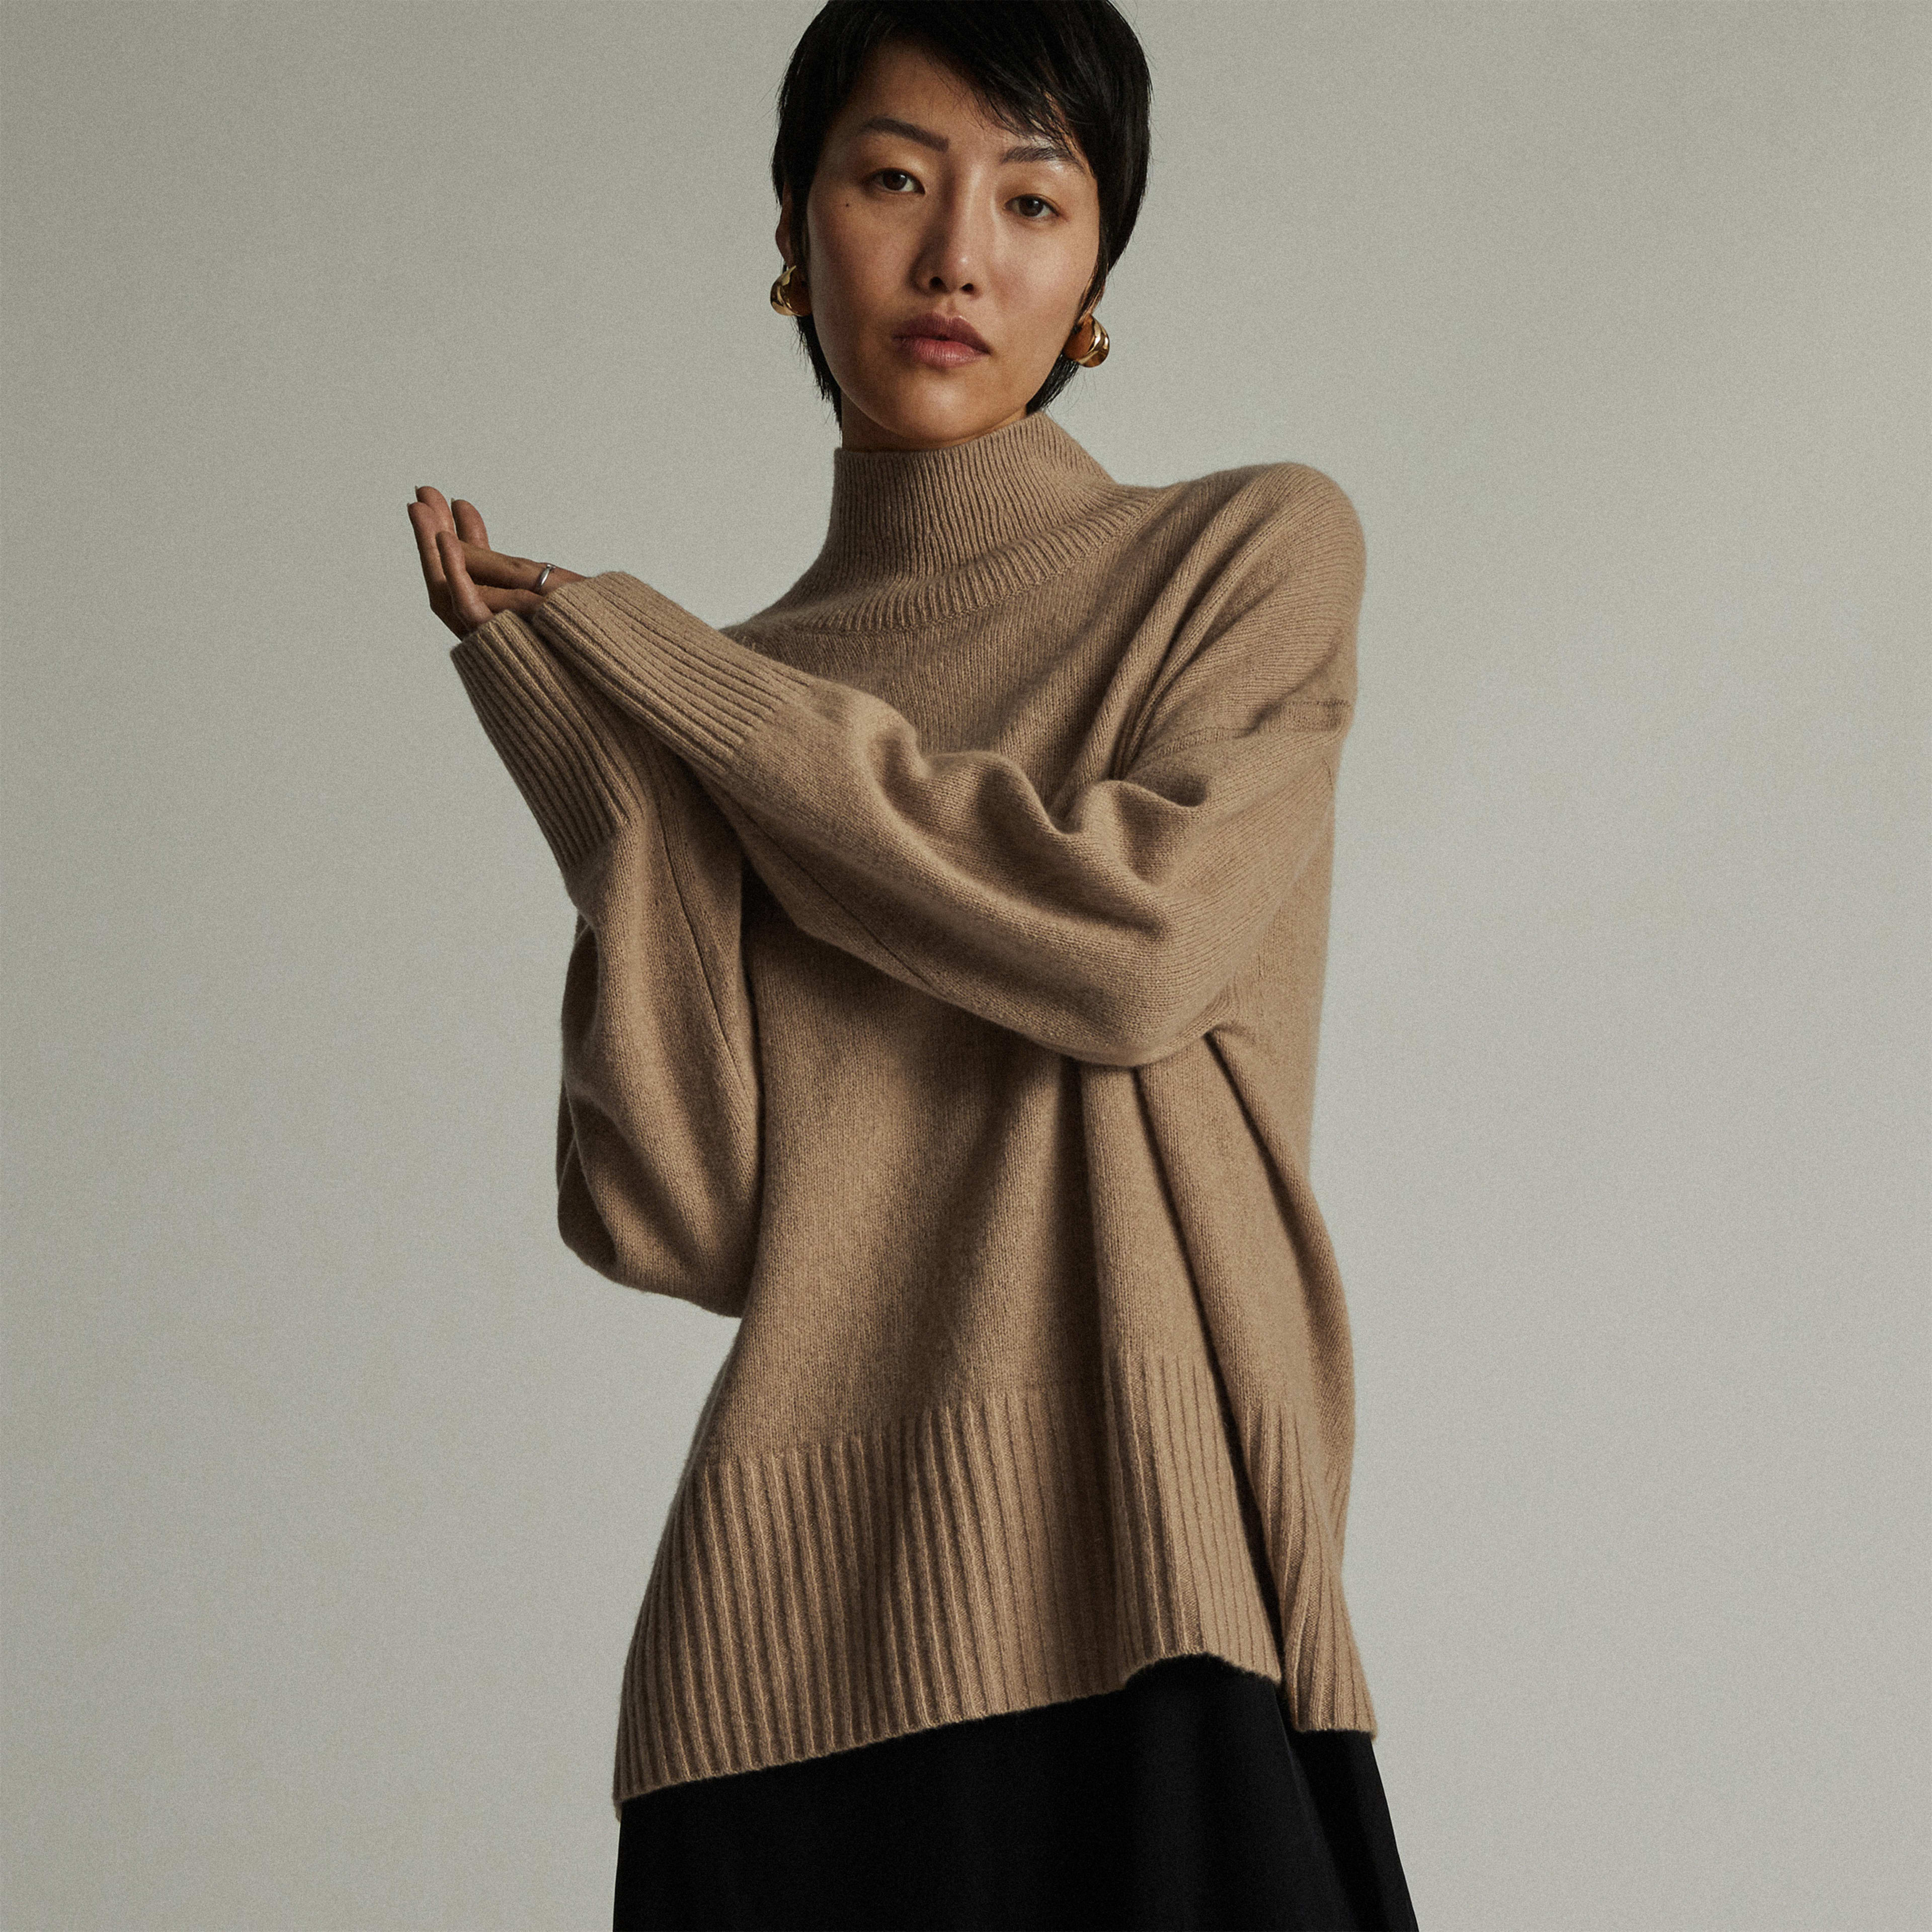 Women's Cashmere Oversized Turtleneck Sweater by Everlane in Light Camel, Size XL